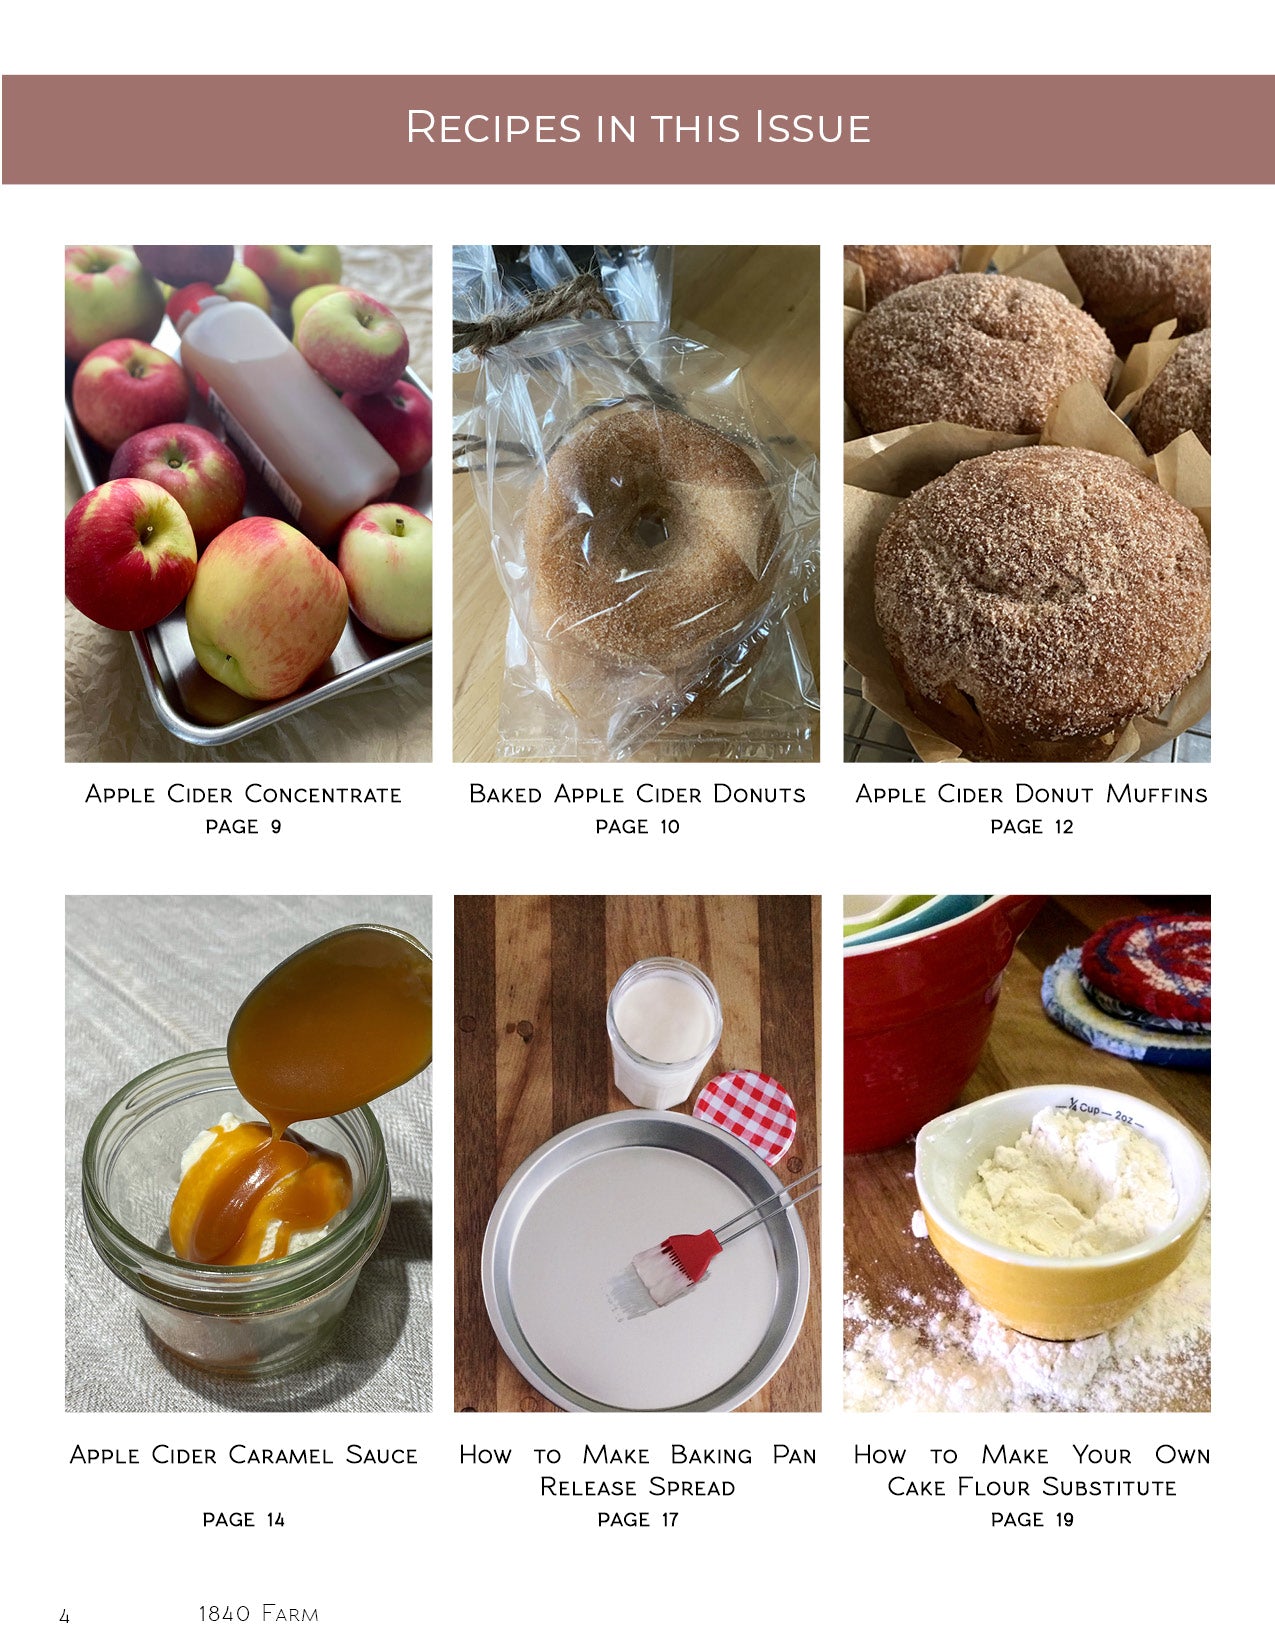 Digital Recipe Booklet - The Apple Cider Recipe Collection (6 recipes, 20 pages)